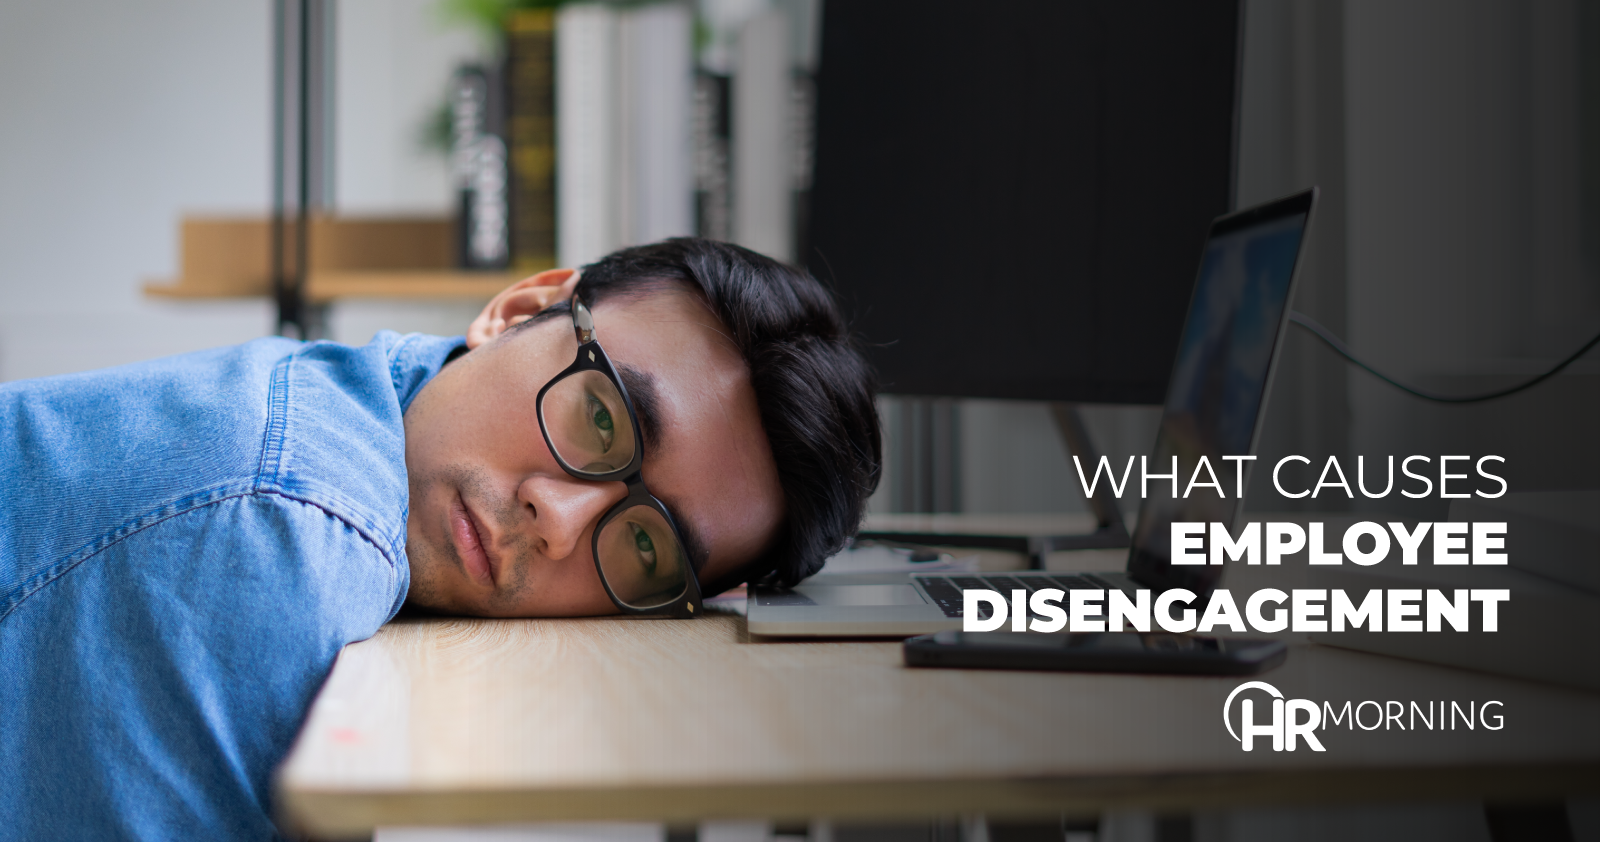 What causes employee disengagement